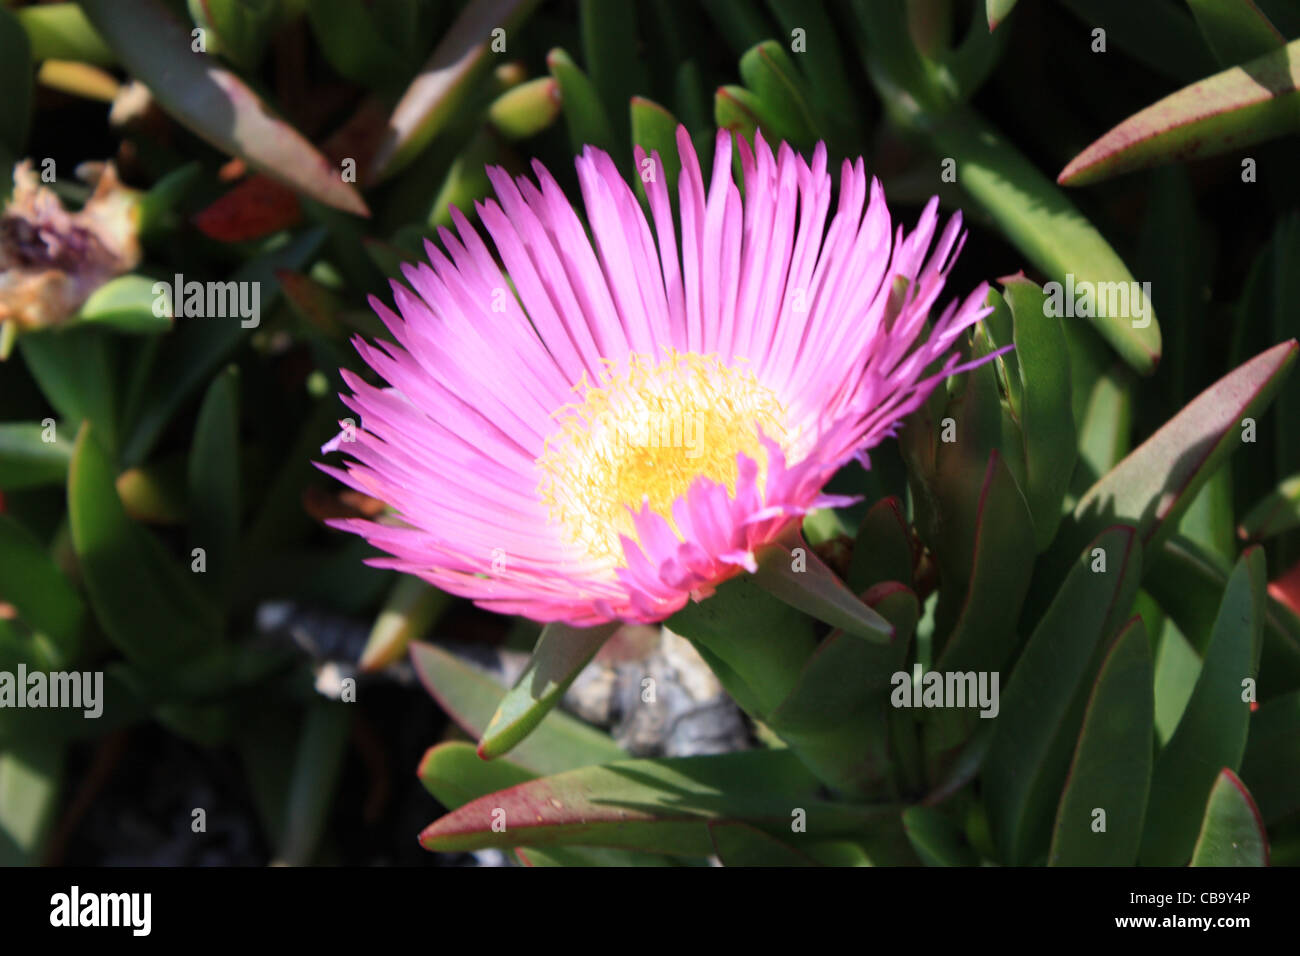 pink flowers appear on a creeping succulent Sally-my-handsome plant (Carpobrotus acinaciformis) also known as a Hottentot Fig Stock Photo